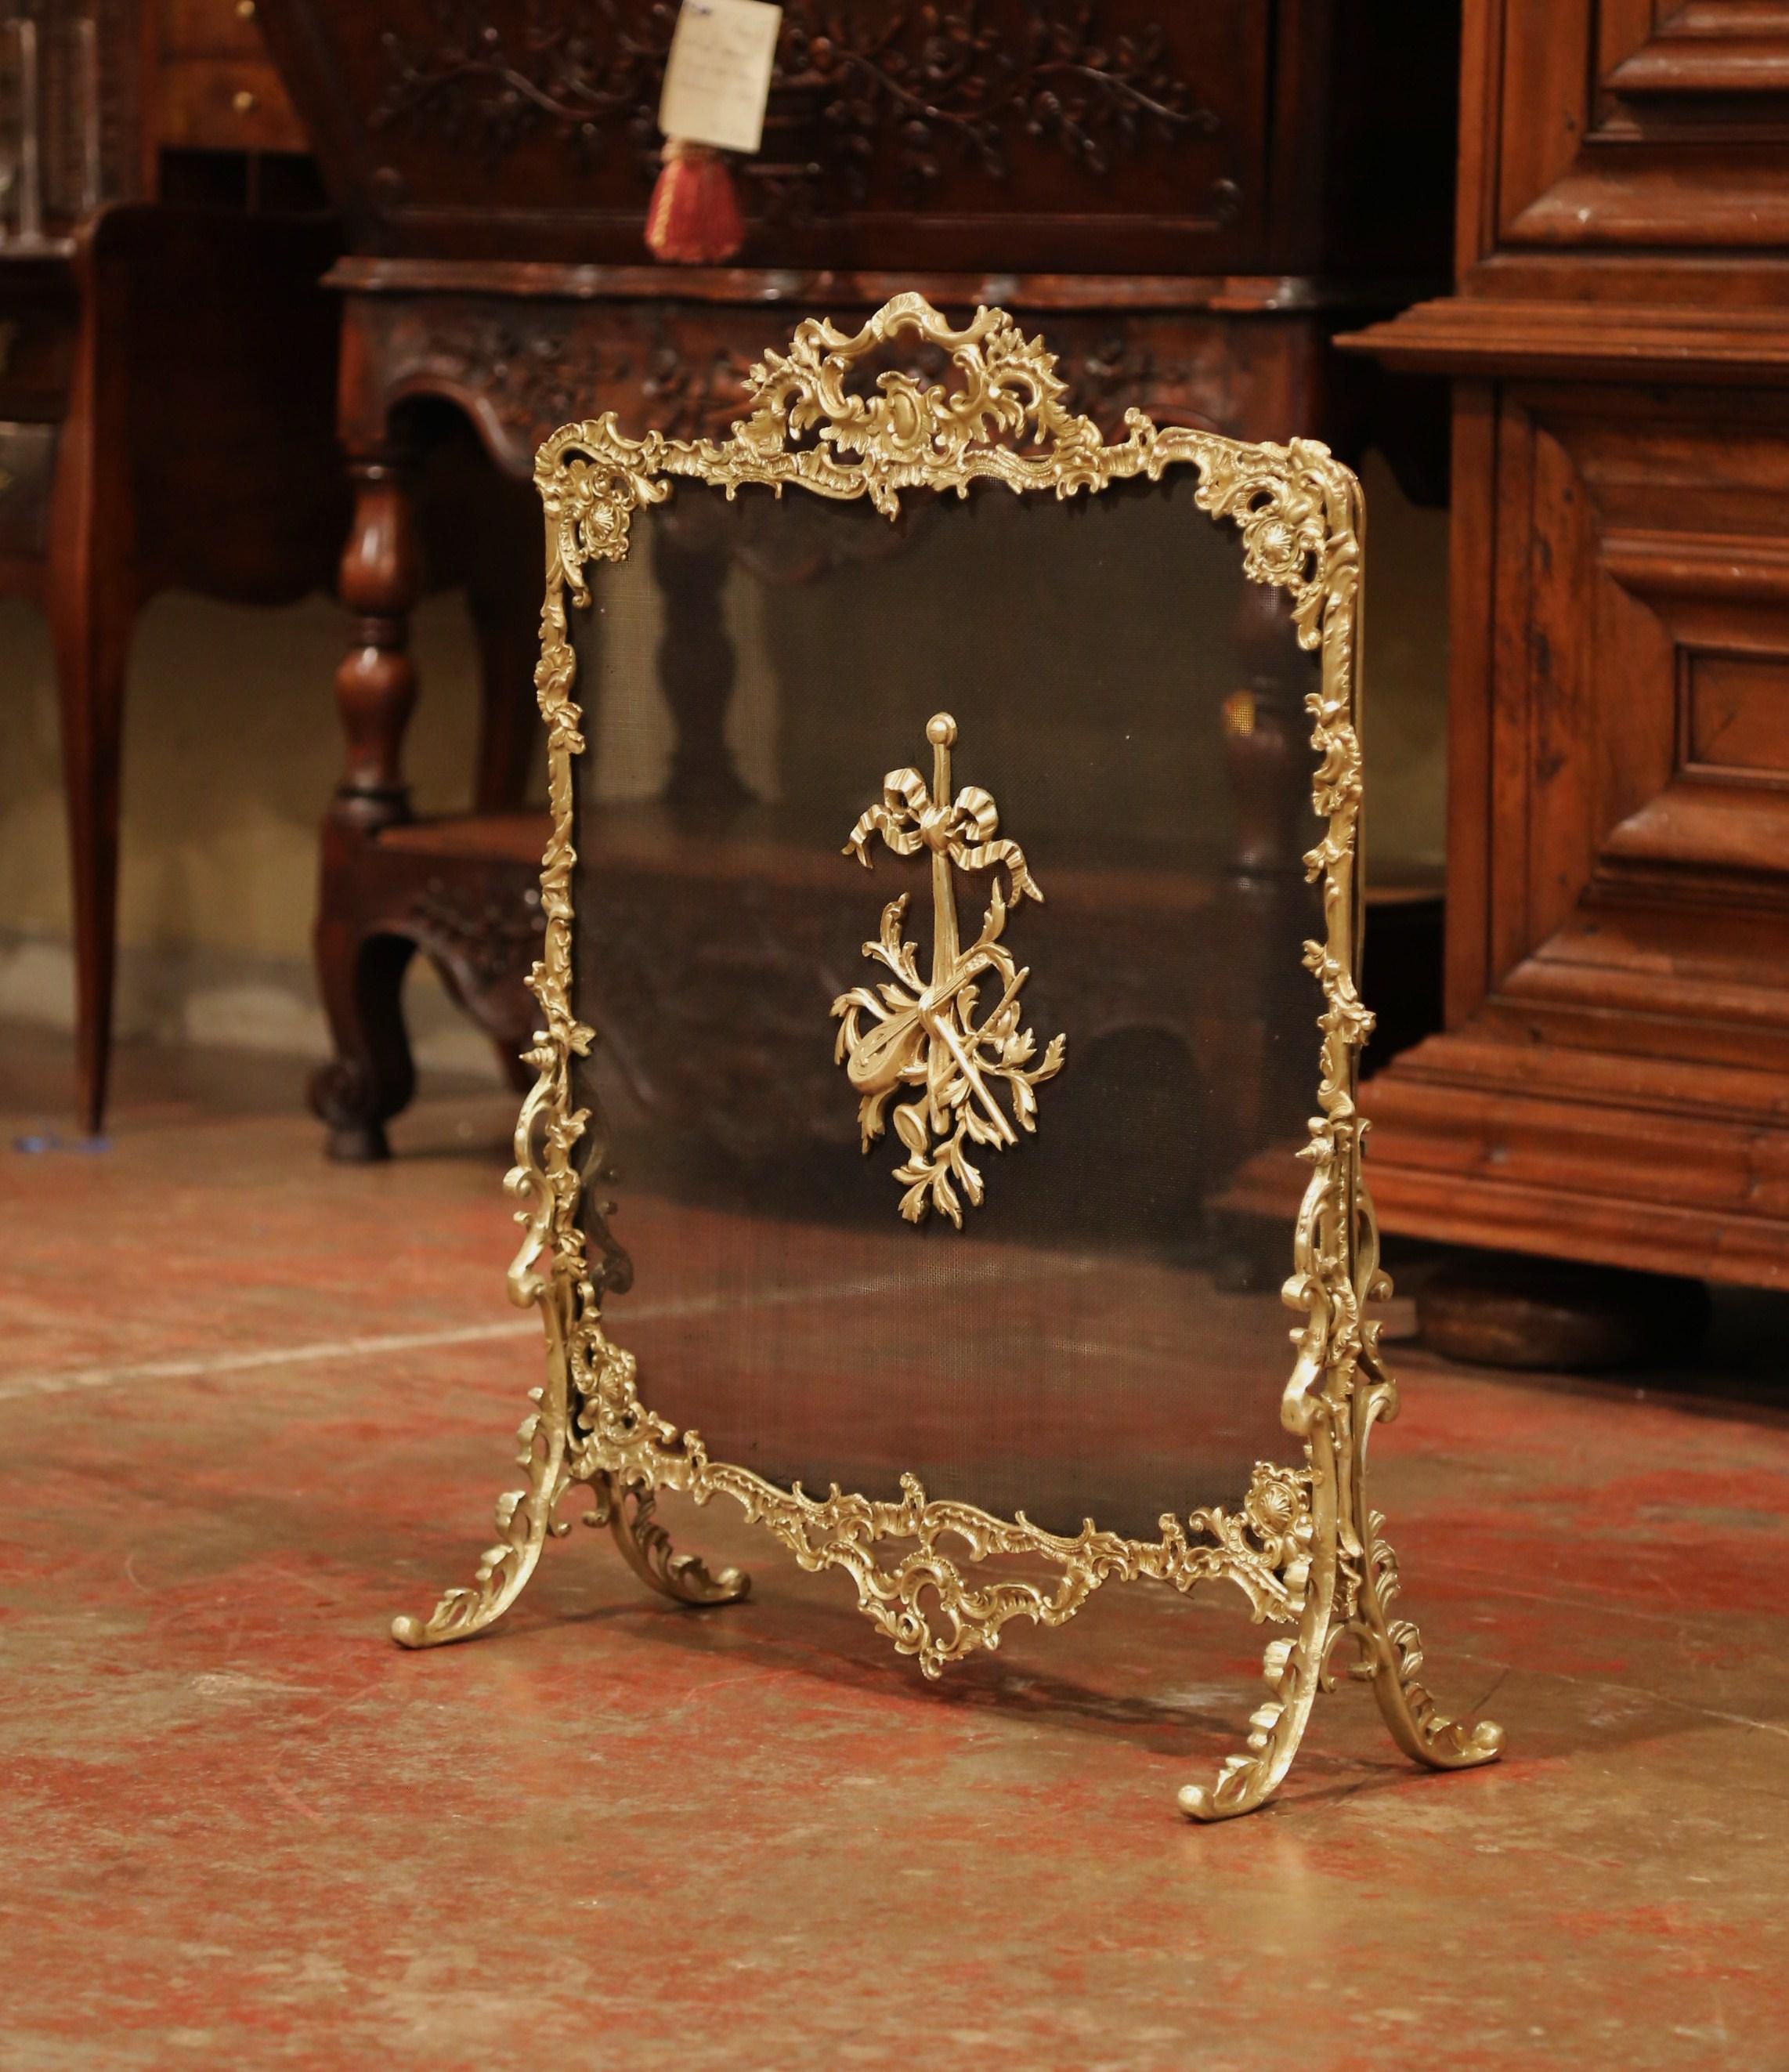 Decorate your fireplace with this antique Rococo bronze doré screen from France. Crafted circa 1870, the cartouche shaped screen sits on four scroll feet and features Louis XV motifs including asymmetrical foliage swaths with centre musical